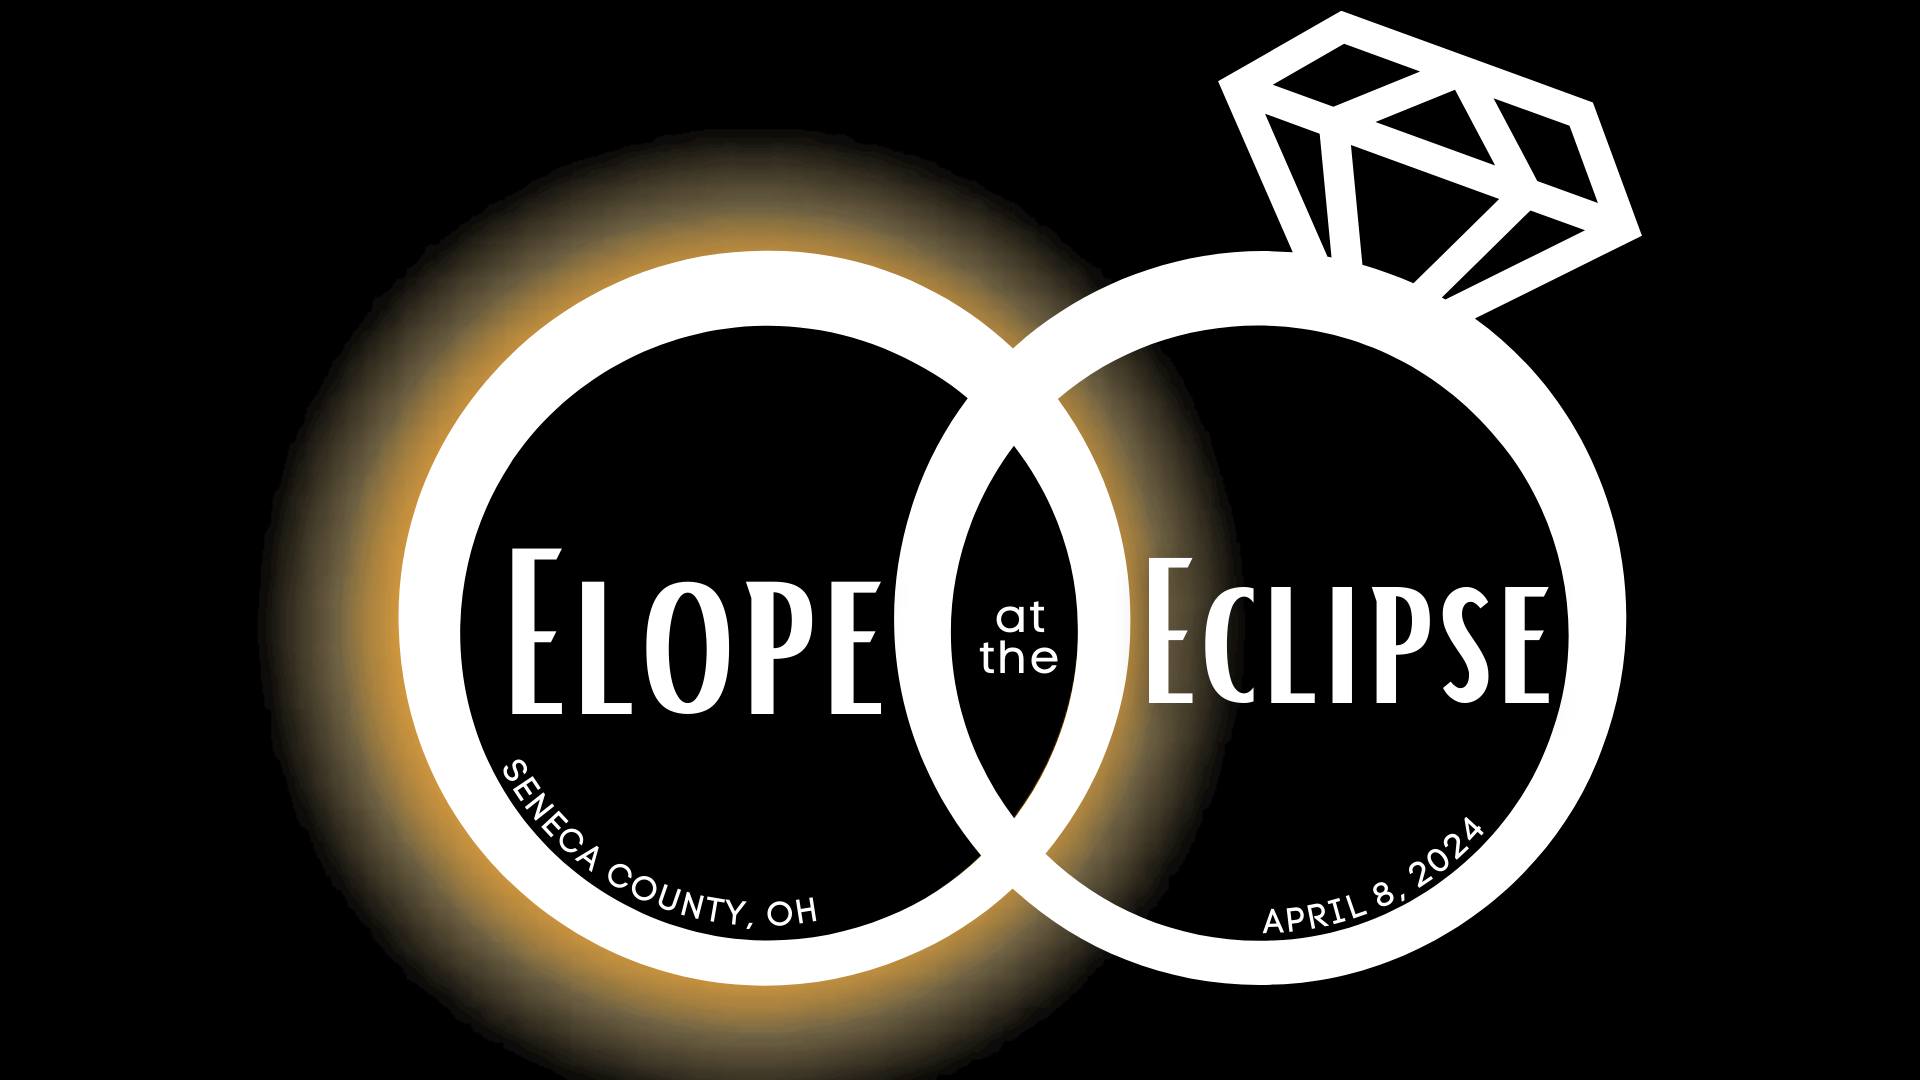 Elope at the Eclipse